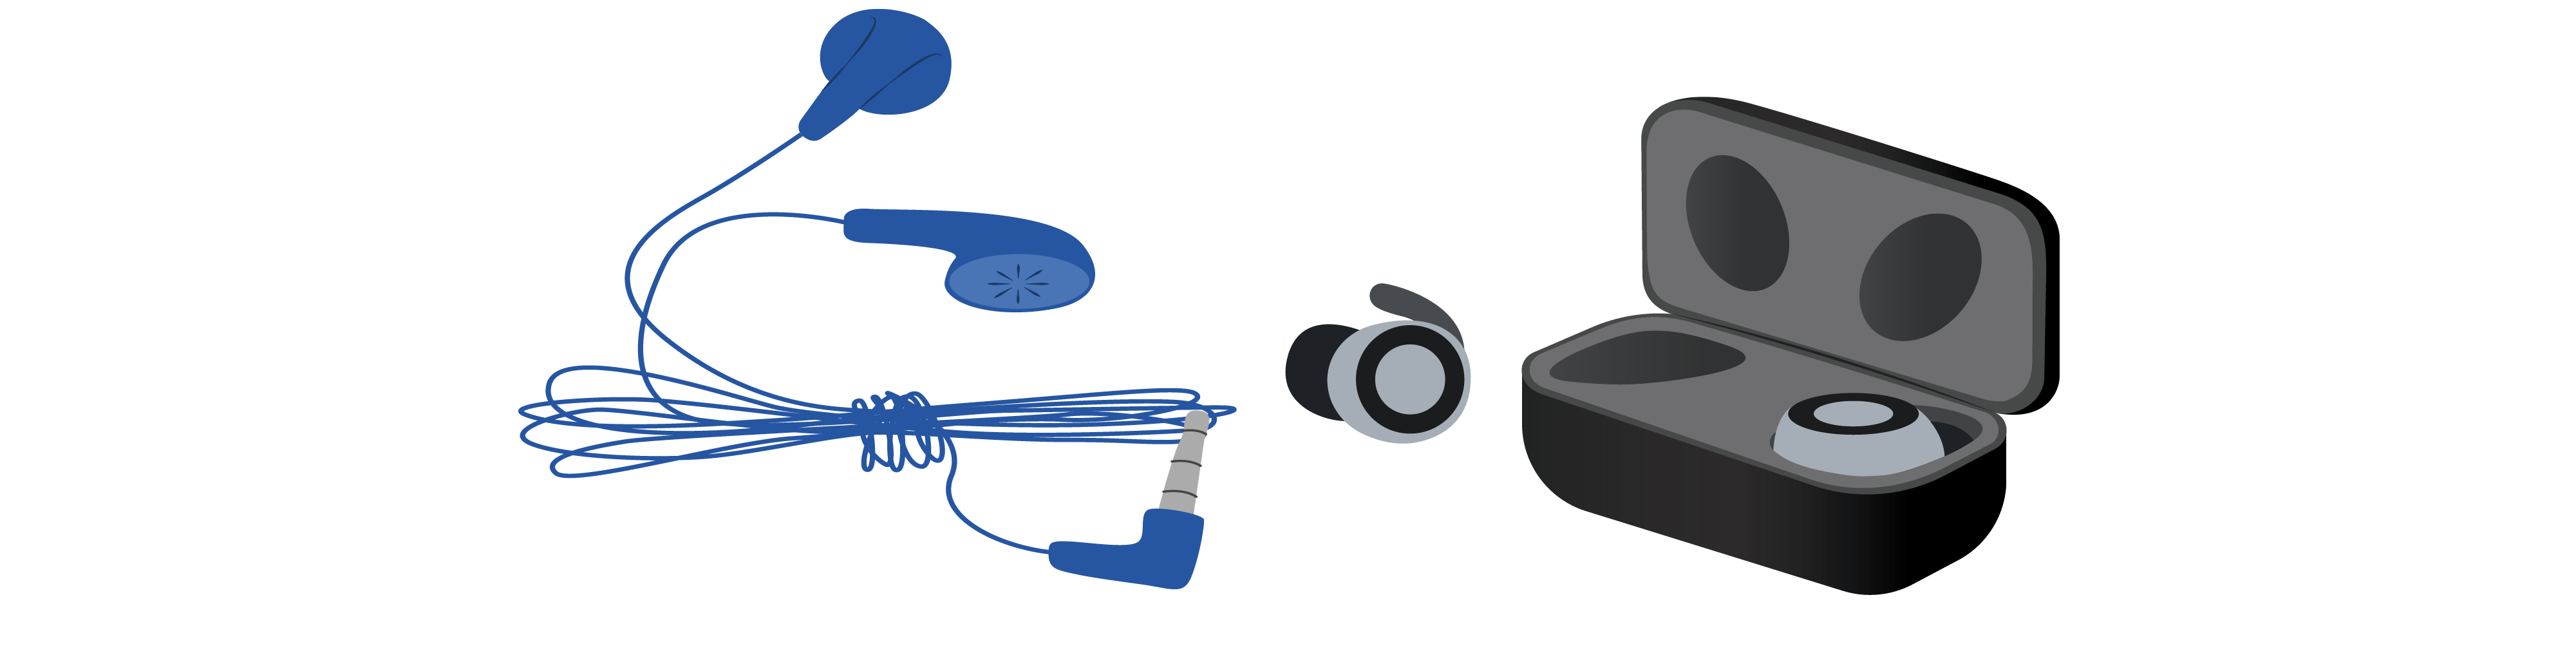 Blue wired earbuds sit to the left of black and grey wireless earbuds and their black and grey case. The case is open and one headphone sits inside the case while the other sits outside of it.